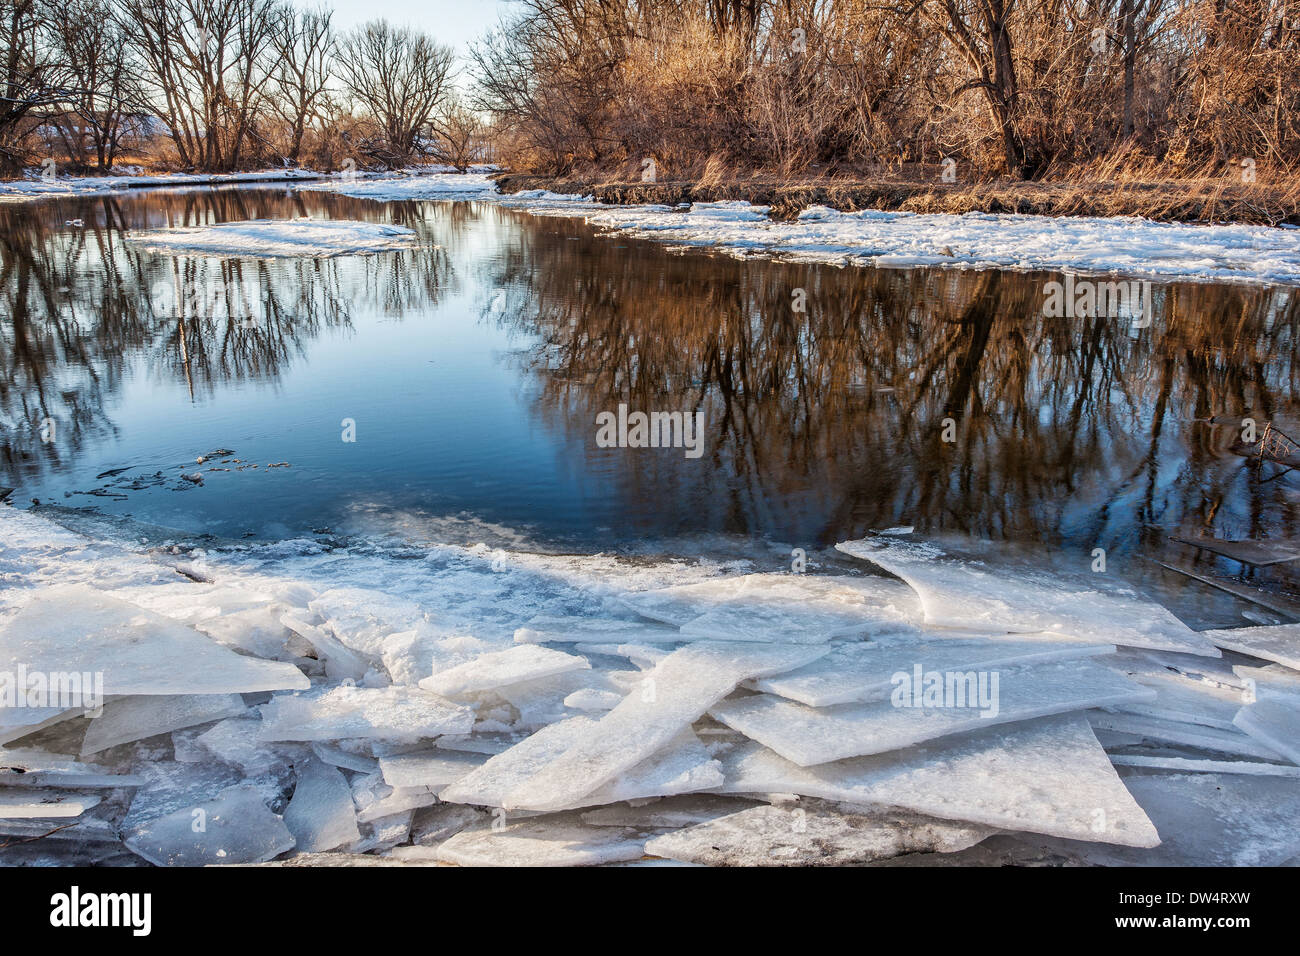 Cache la Poudre River in Fort Collins, Colorado, winter or early spring scenery with icy shores Stock Photo